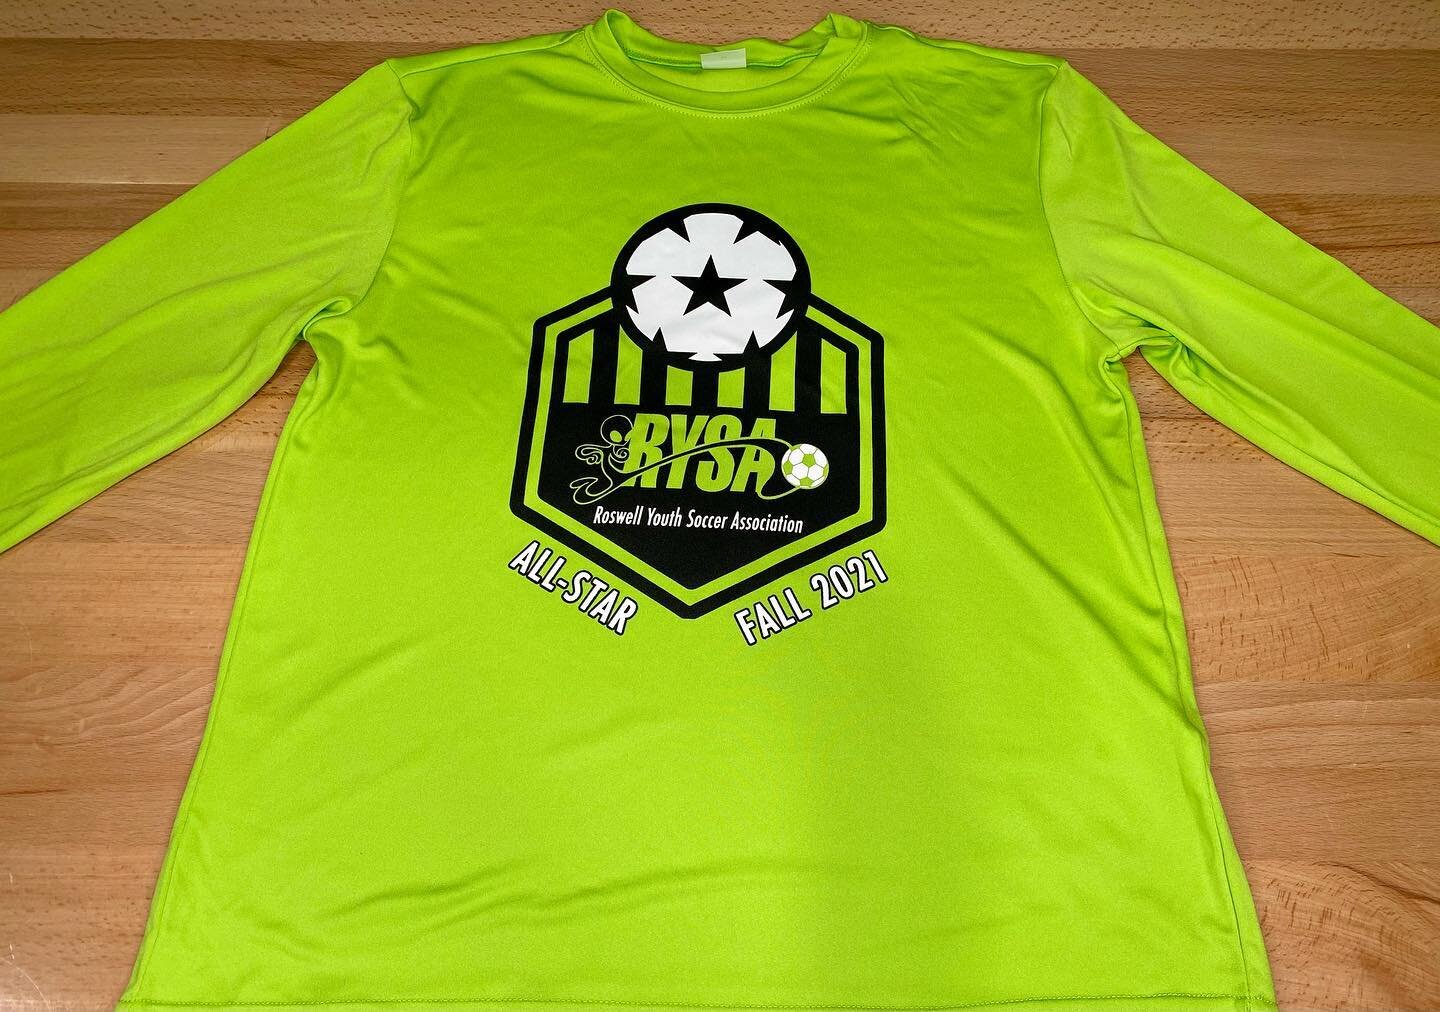 Jerseys for the Fall 2021 RYSA All-Stars. Go check out the game tonight at Cielo Grande to see Roswell&rsquo;s best youth soccer players!
.
.
#moonmanprinting #screenprinting #localprintshop #thanksforkeepingitlocal #roswellnm #downtownroswell #mains